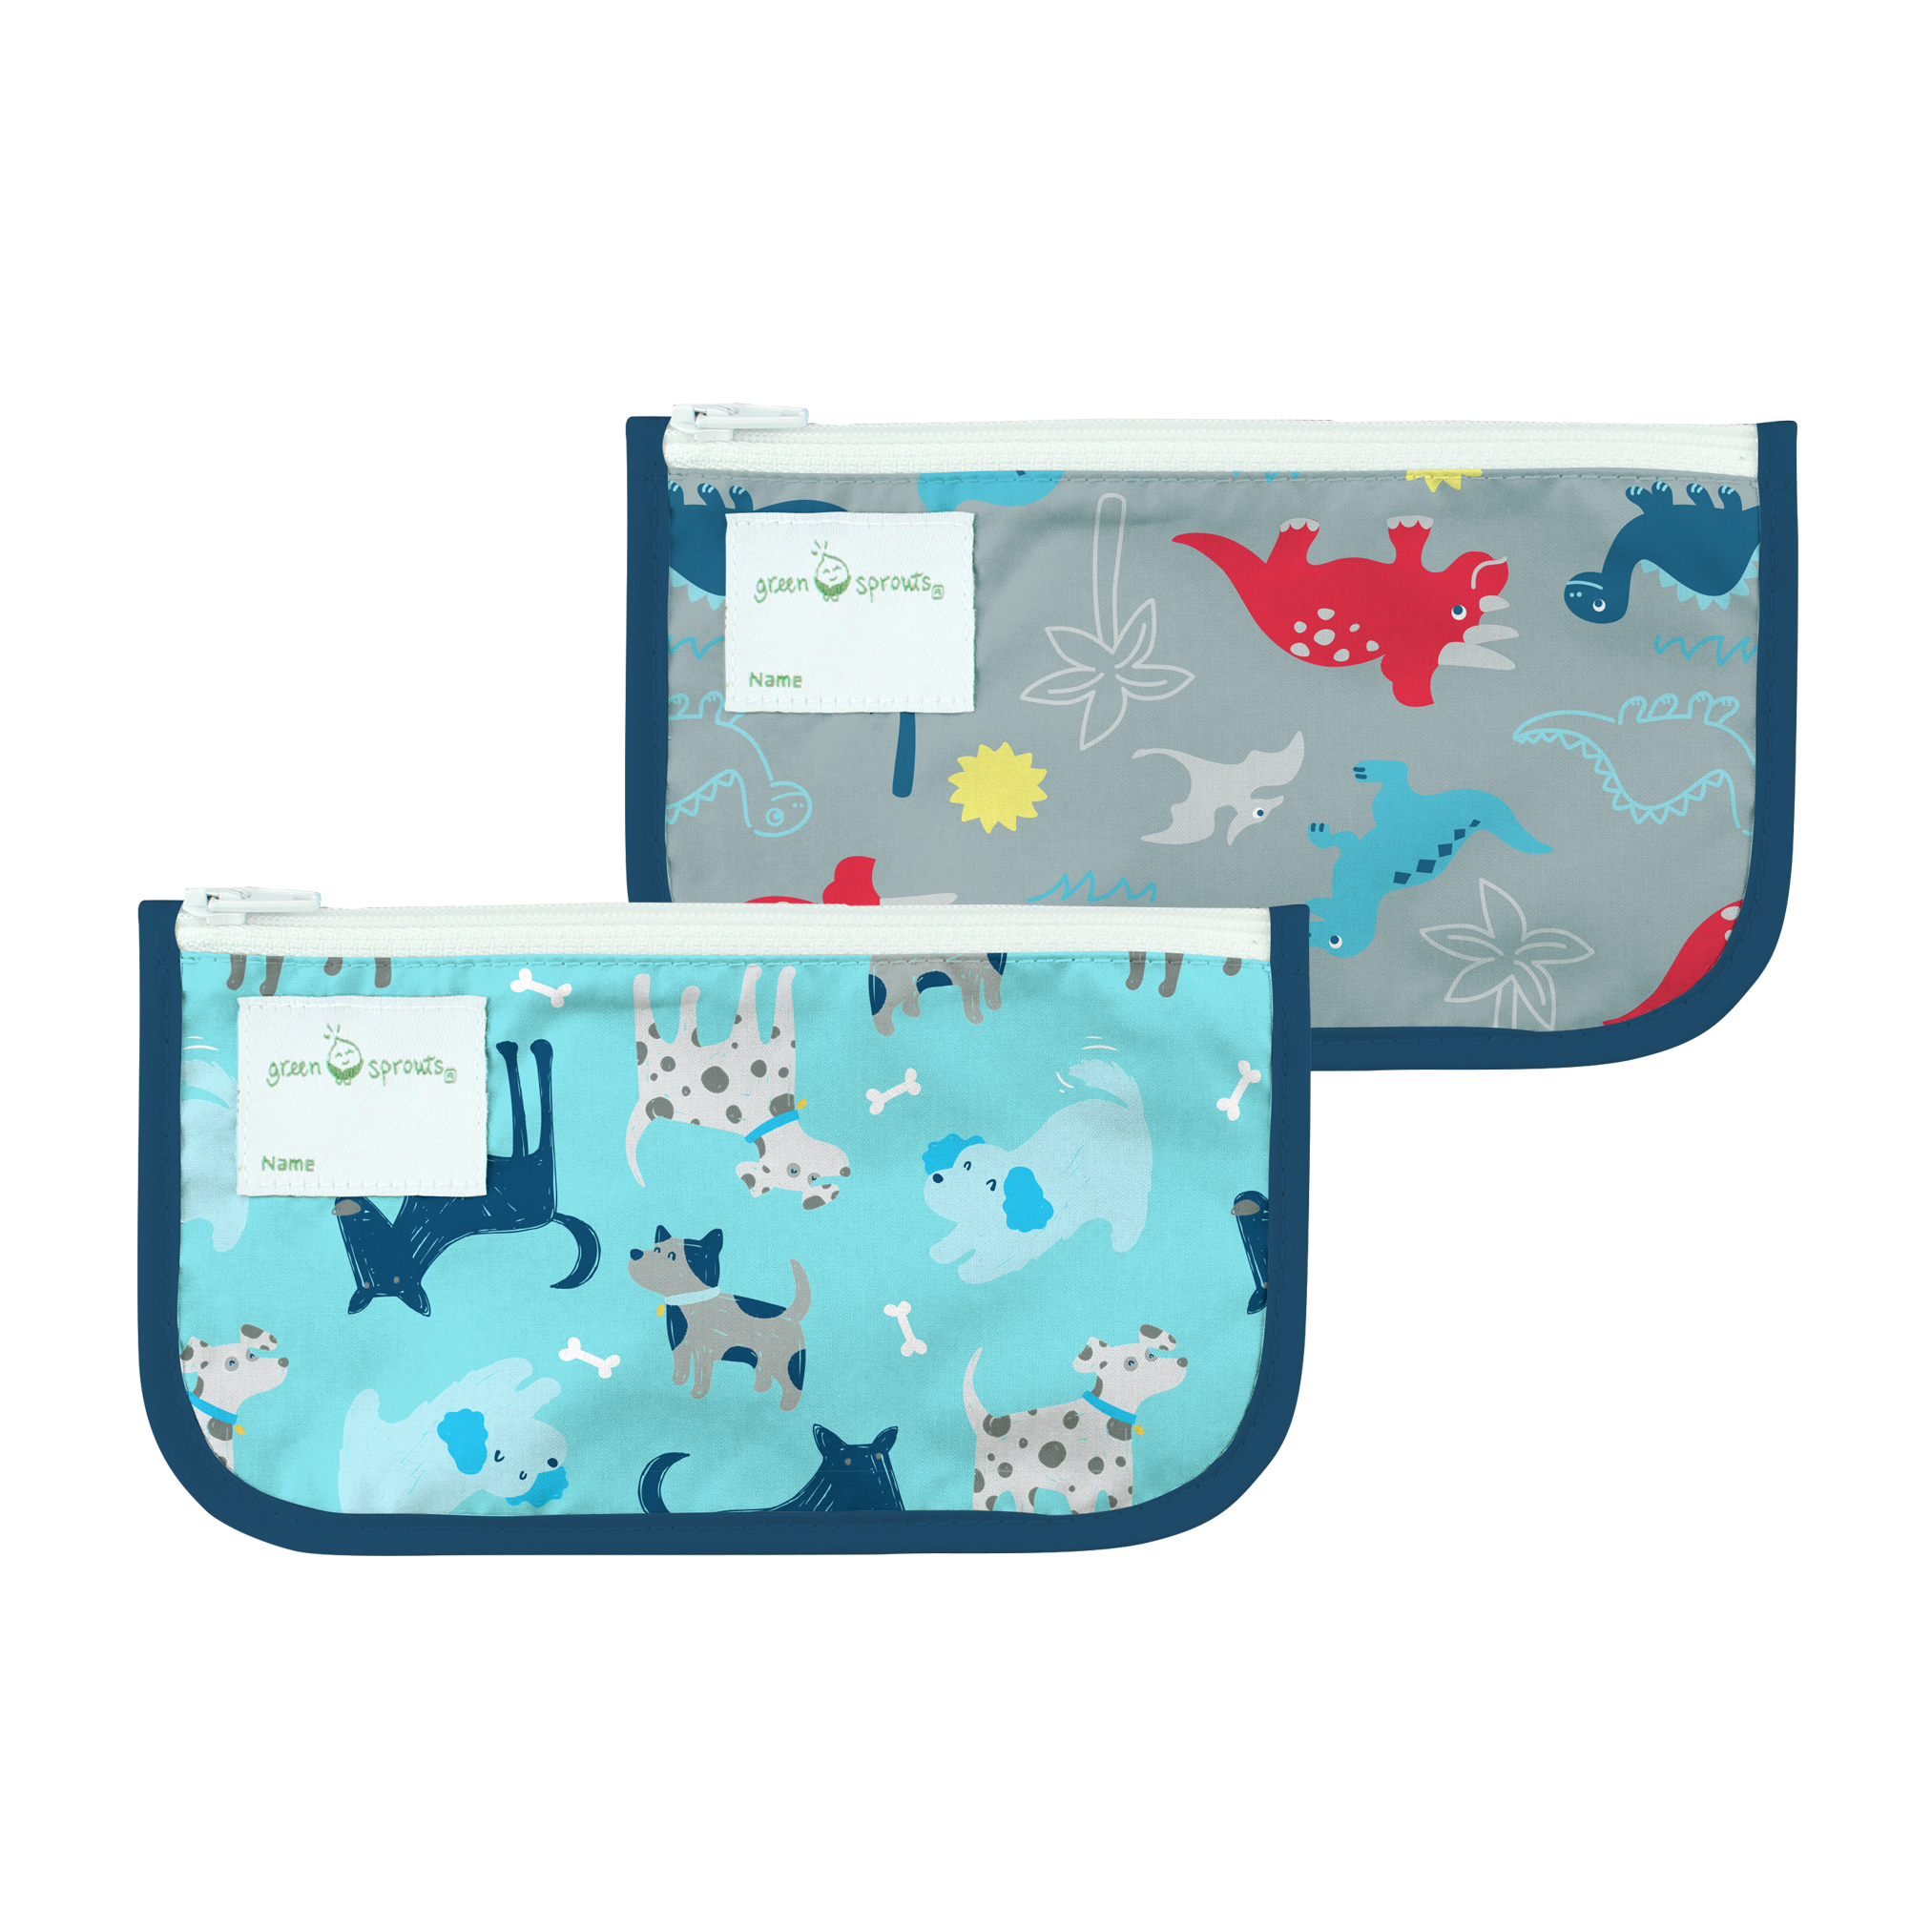 Green Sprouts 2-Pack Reusable Insulated Sandwich Bags in Aqua Butterflies